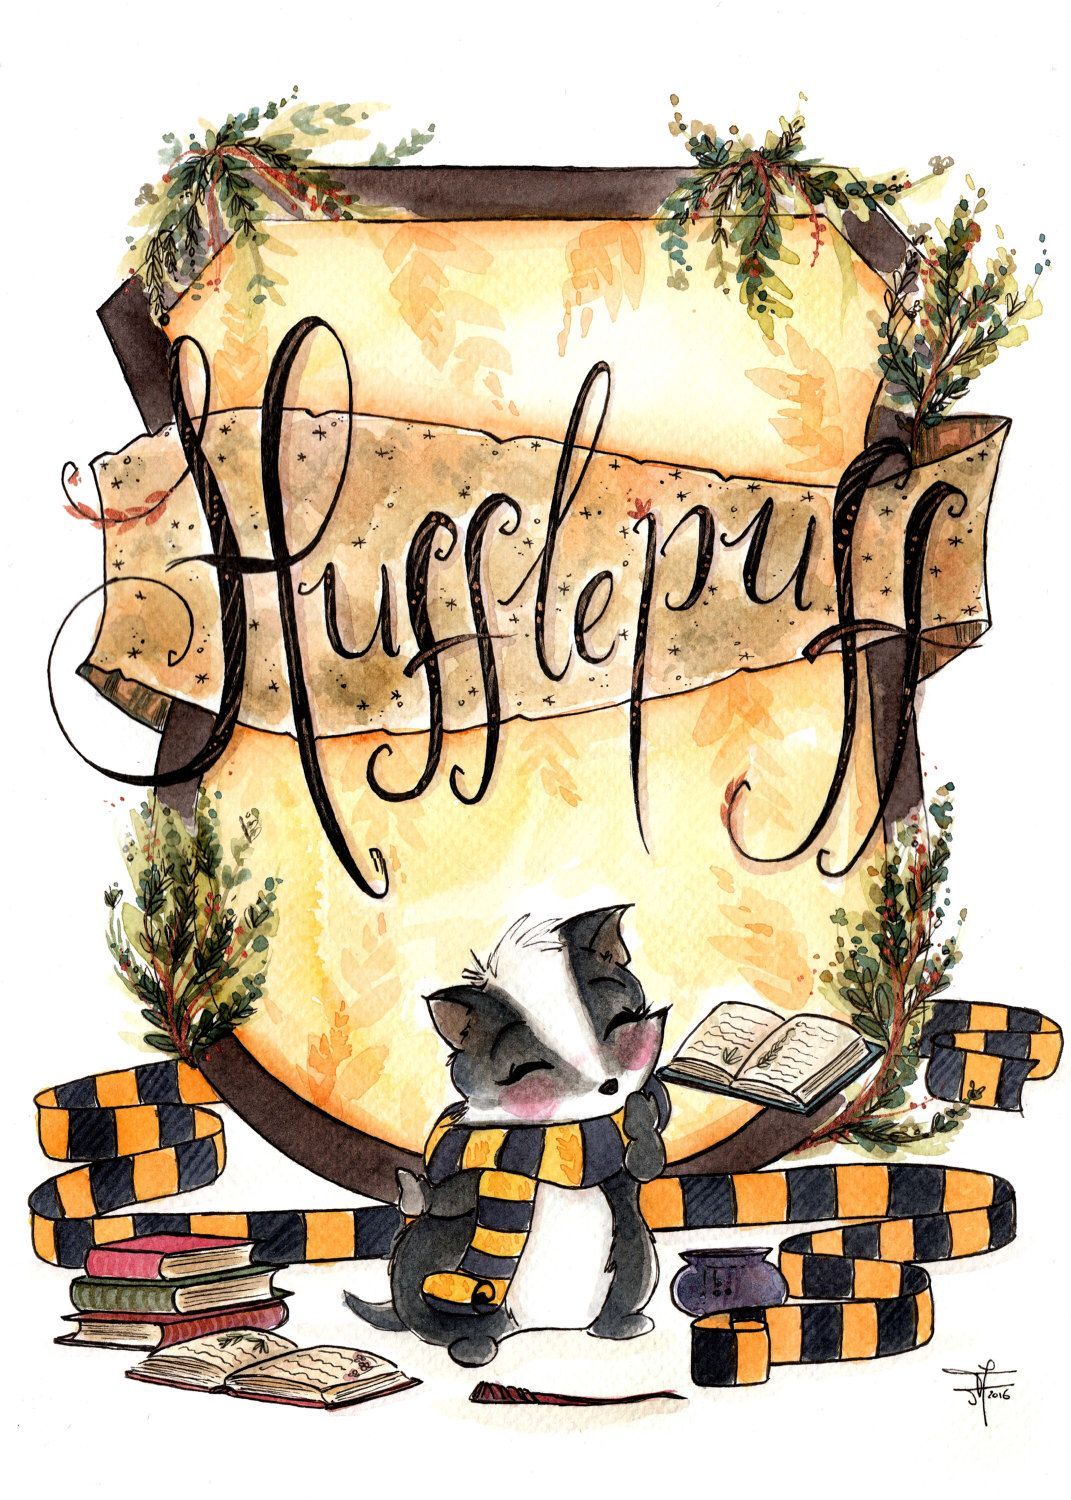 Harry Potter  Hufflepuff  Wallpaper by Lèssy  Harry potter art Harry  potter wallpaper Hufflepuff wallpaper